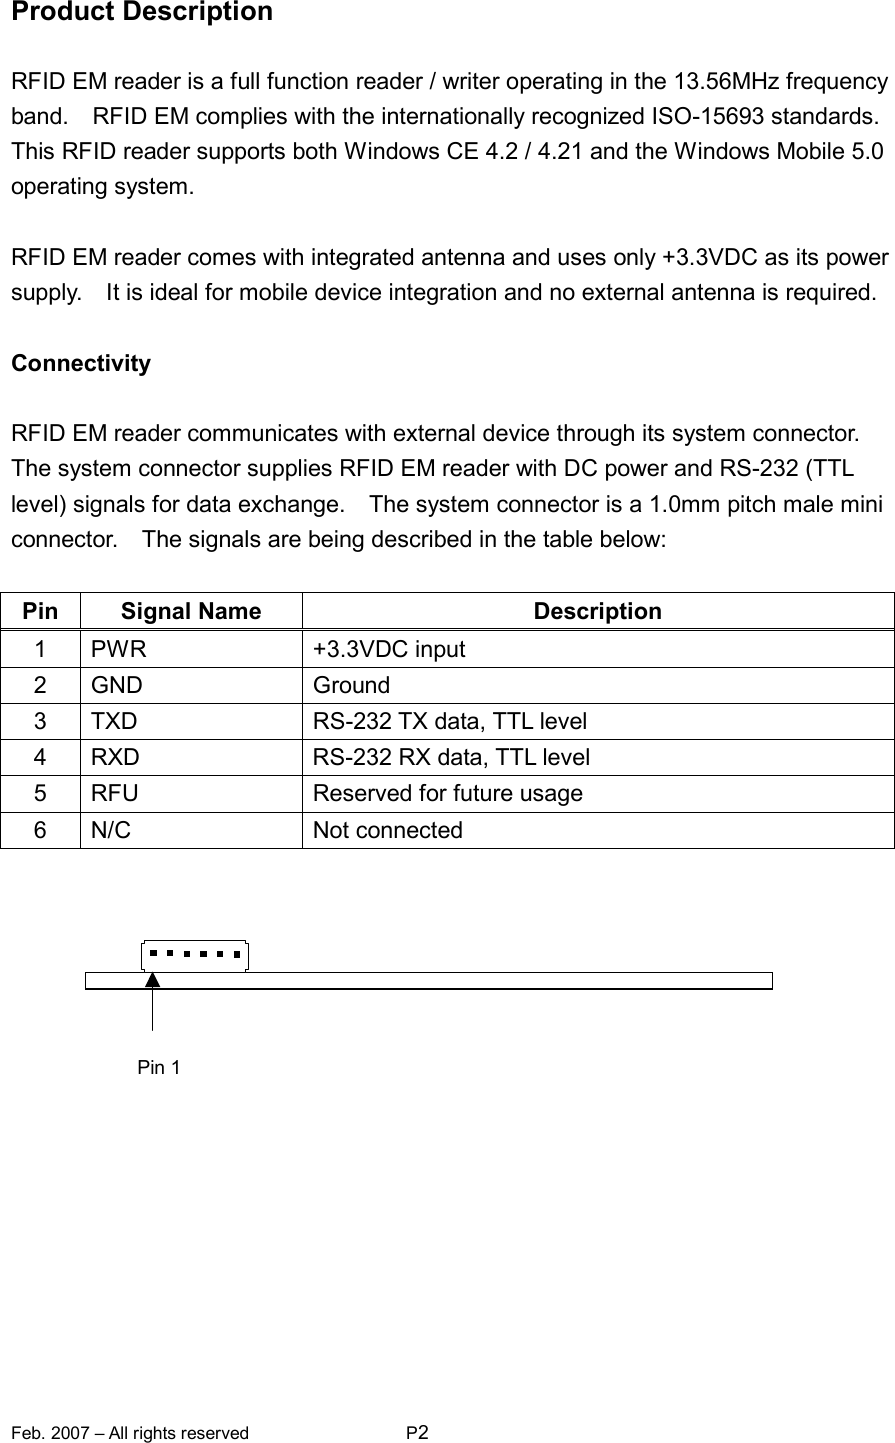 Feb. 2007 – All rights reserved  P2   Product Description  RFID EM reader is a full function reader / writer operating in the 13.56MHz frequency band.    RFID EM complies with the internationally recognized ISO-15693 standards.   This RFID reader supports both Windows CE 4.2 / 4.21 and the Windows Mobile 5.0 operating system.  RFID EM reader comes with integrated antenna and uses only +3.3VDC as its power supply.    It is ideal for mobile device integration and no external antenna is required.  Connectivity  RFID EM reader communicates with external device through its system connector.   The system connector supplies RFID EM reader with DC power and RS-232 (TTL level) signals for data exchange.    The system connector is a 1.0mm pitch male mini connector.    The signals are being described in the table below:  Pin  Signal Name  Description 1  PWR  +3.3VDC input 2  GND  Ground 3  TXD  RS-232 TX data, TTL level 4  RXD  RS-232 RX data, TTL level 5  RFU  Reserved for future usage 6  N/C  Not connected      Pin 1 